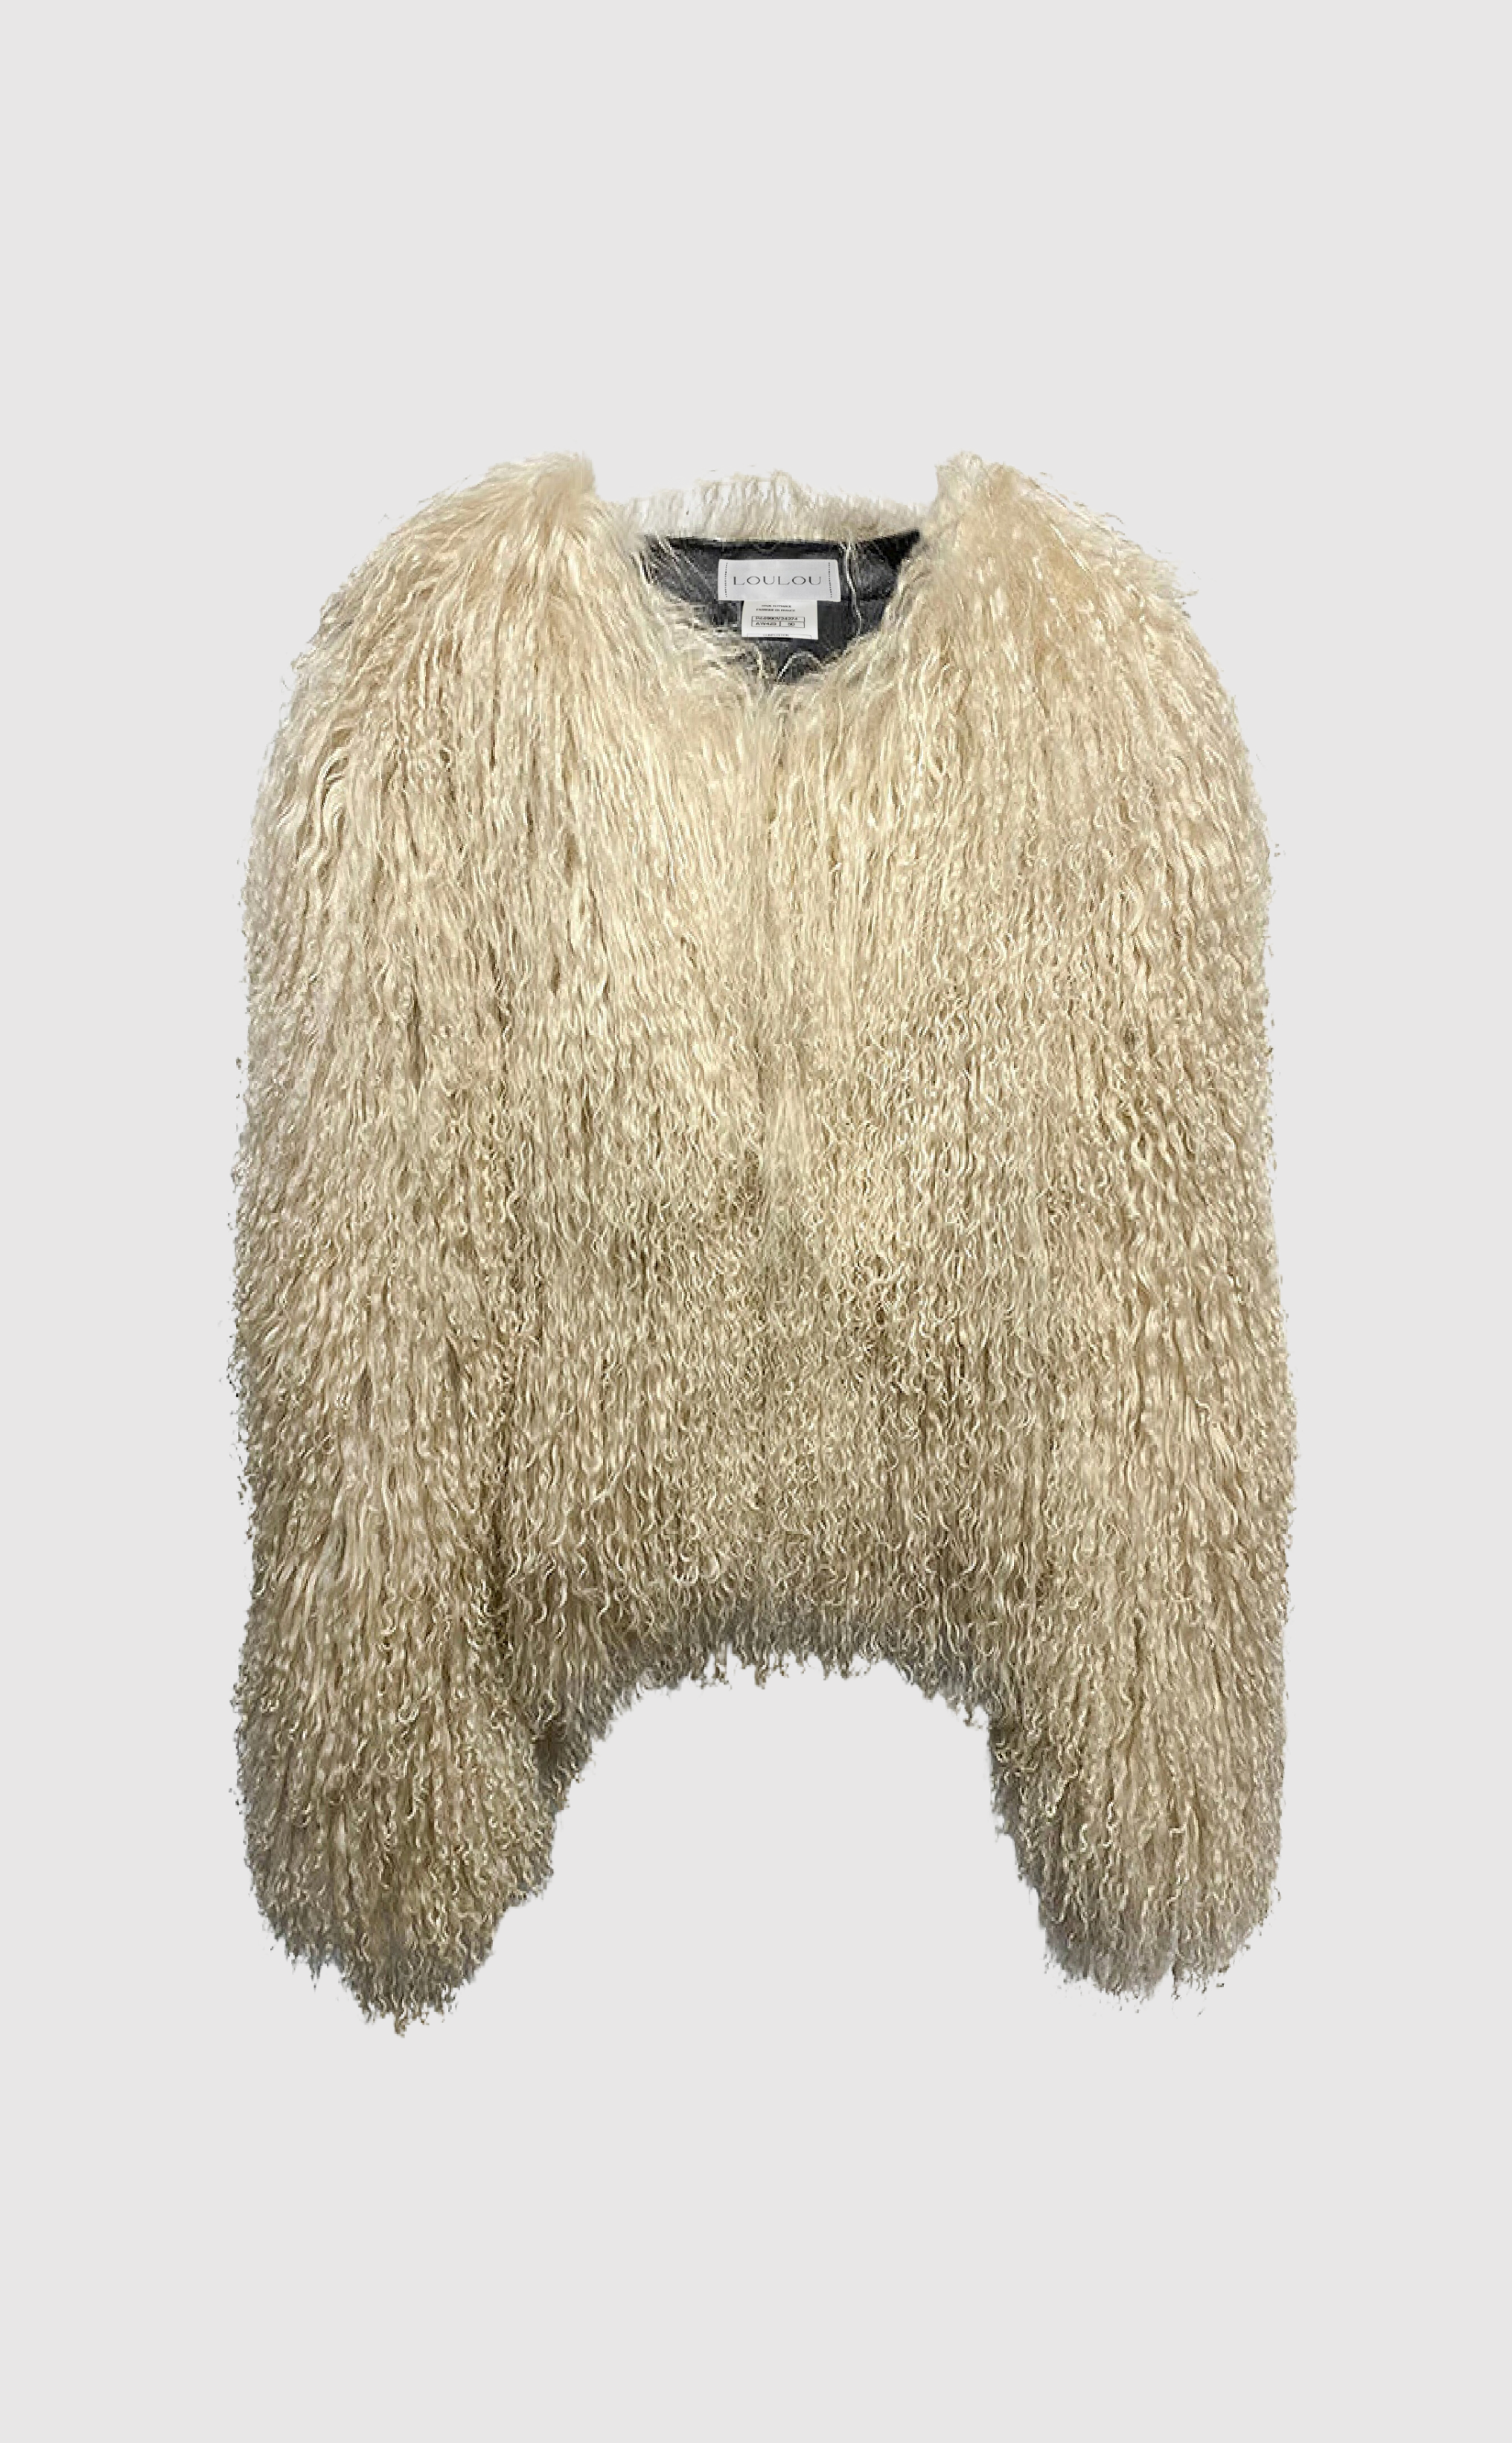 Dating You / Hating You cropped shearling jacket